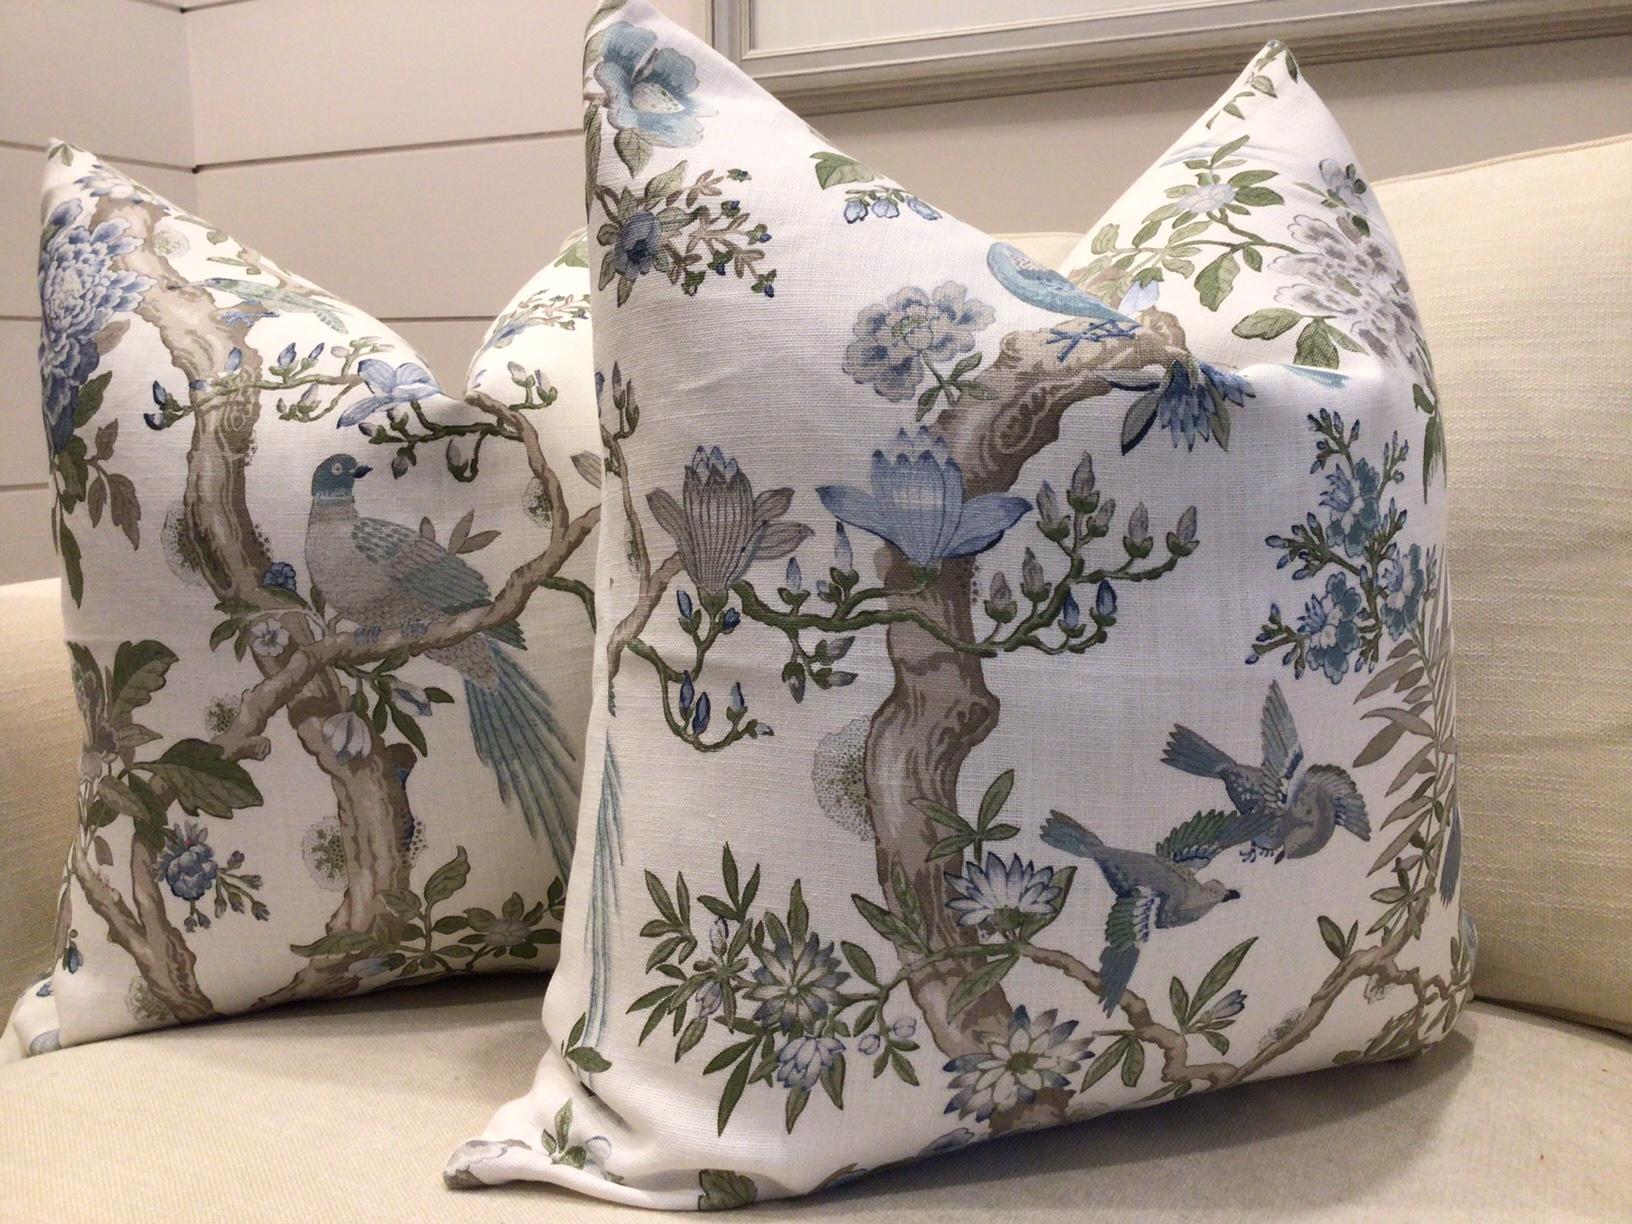 From Gp and J Baker “Eltham” is a gorgeous floral on a white background. One of my faves. Covers feature swirls of soft blue and green and taupe with a lovely botanical print with birds throughout.

Your covers will come with a coordinating soft